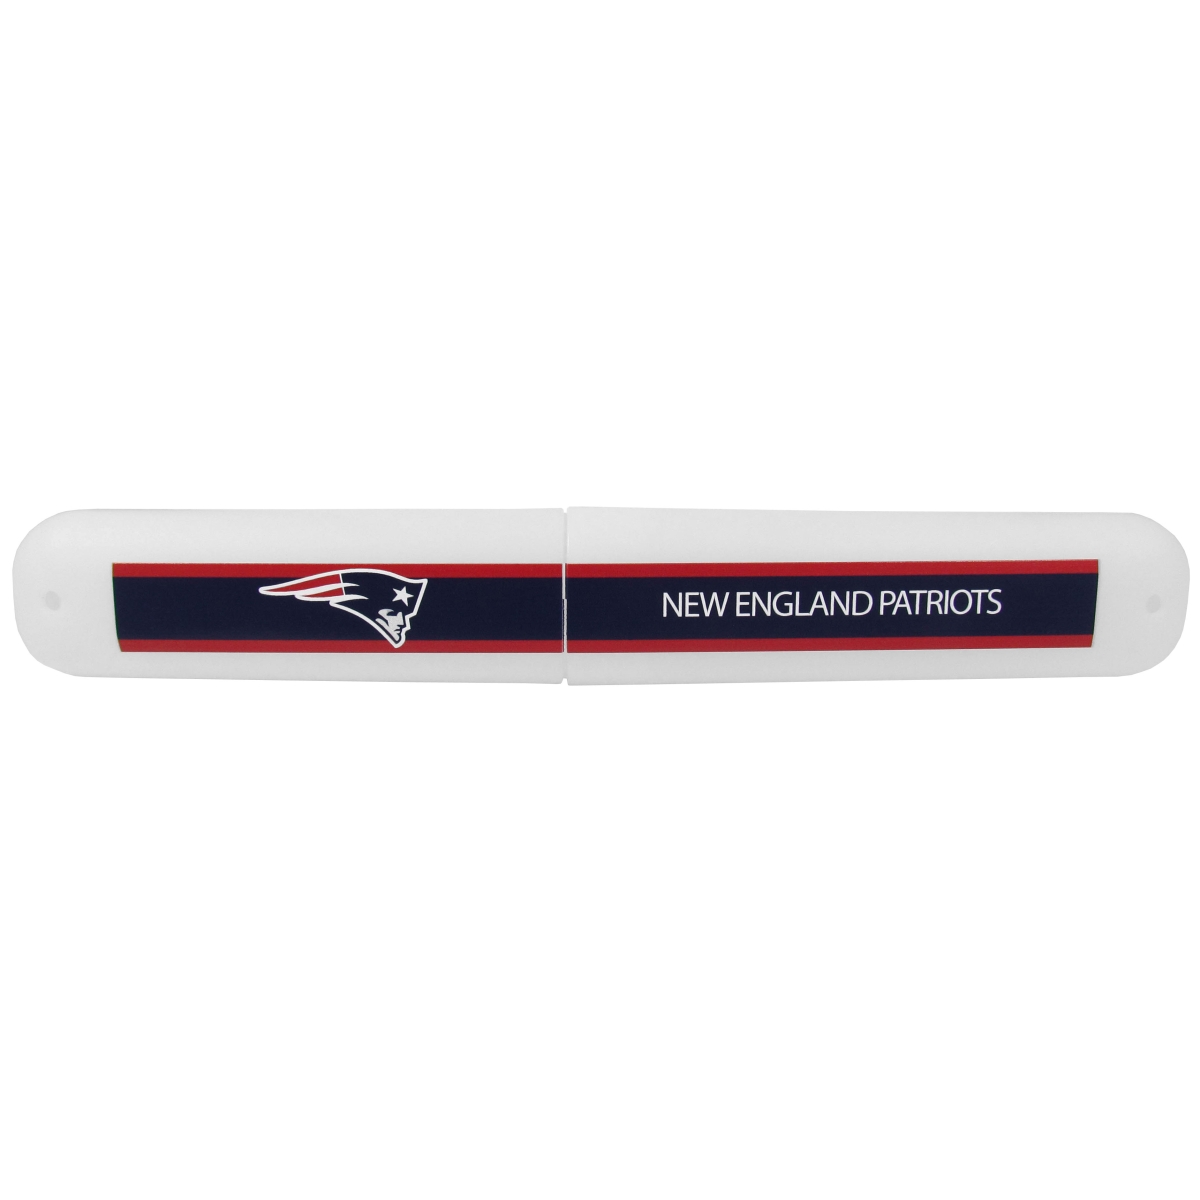 Picture of Siskiyou FTBC120 Unisex NFL New England Patriots Travel Toothbrush Case - One Size